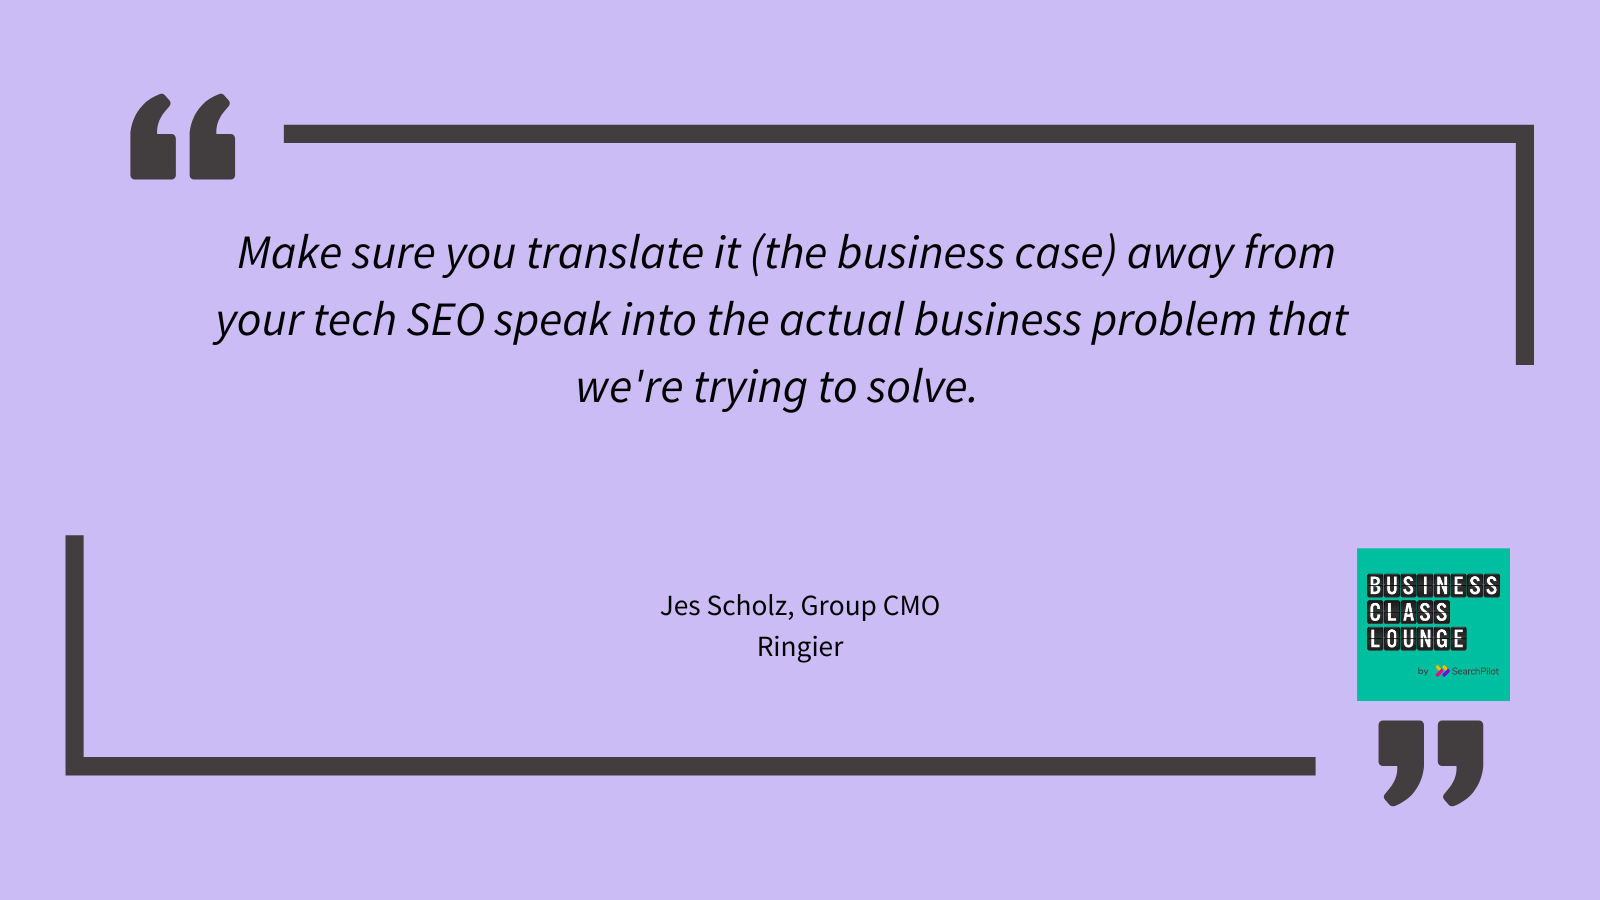 Translate business case away from tech SEO speak_Jes Scholz quote